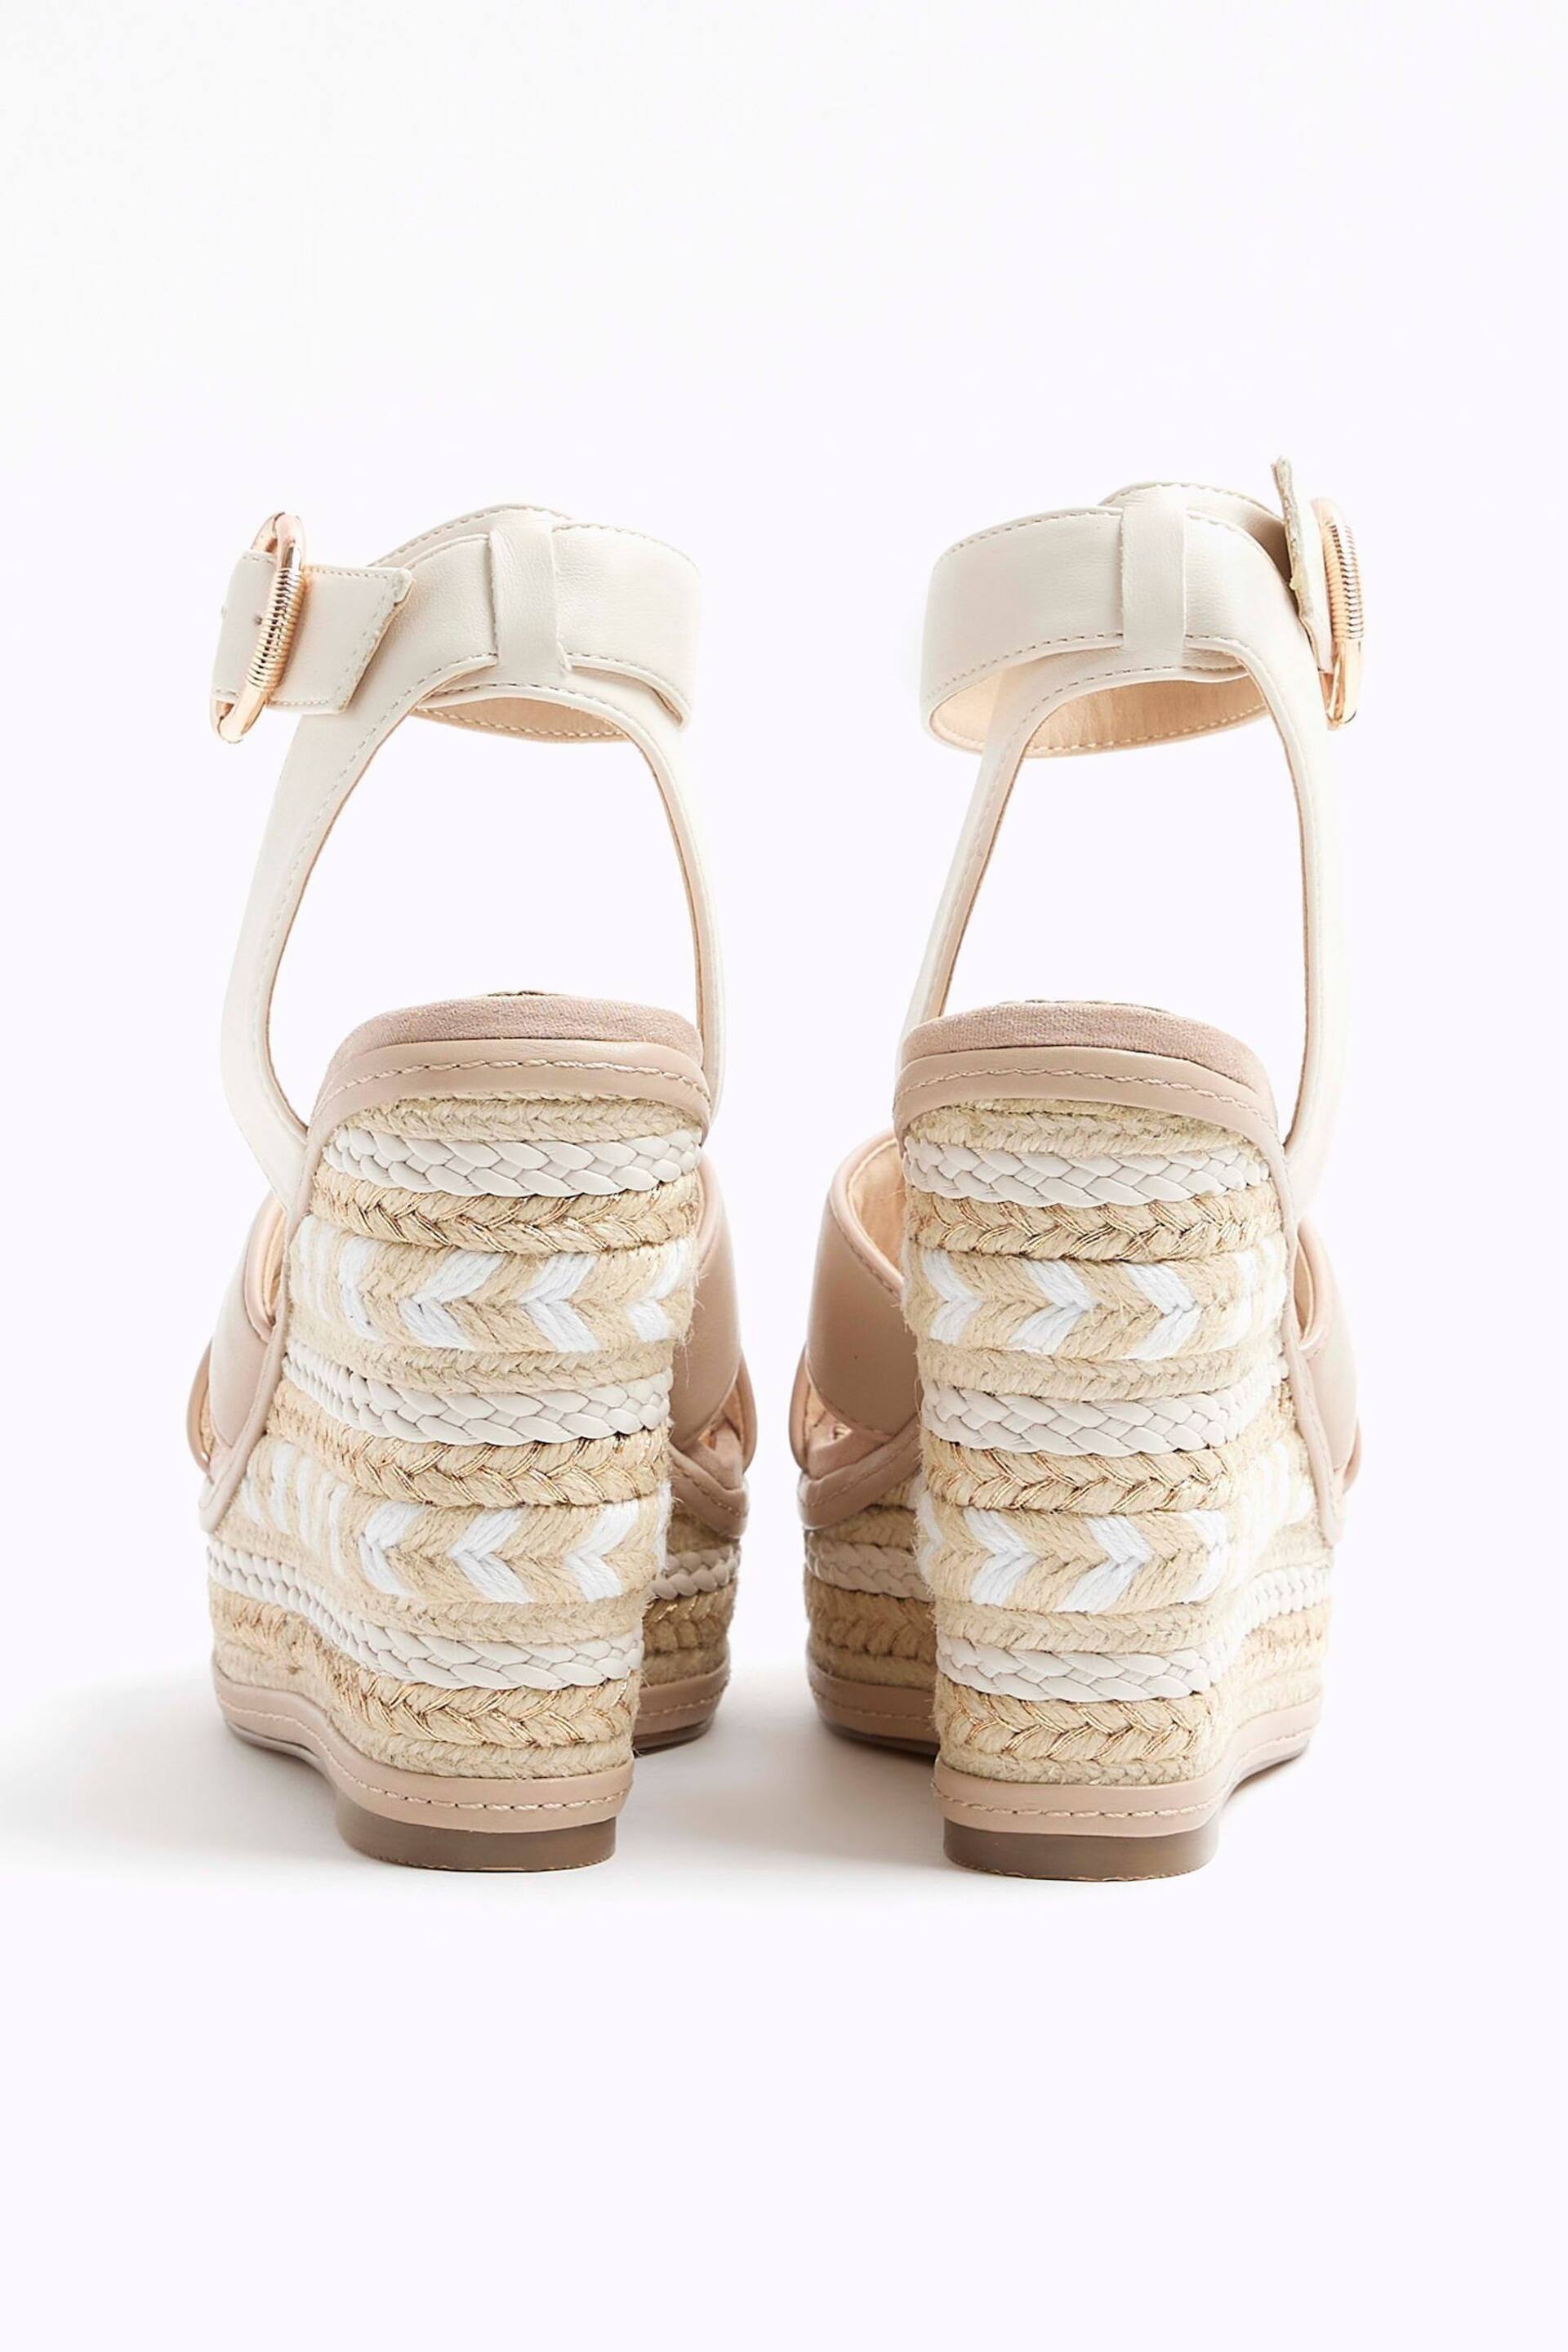 River Island White Espadrille Wedge Sandals - Image 3 of 4